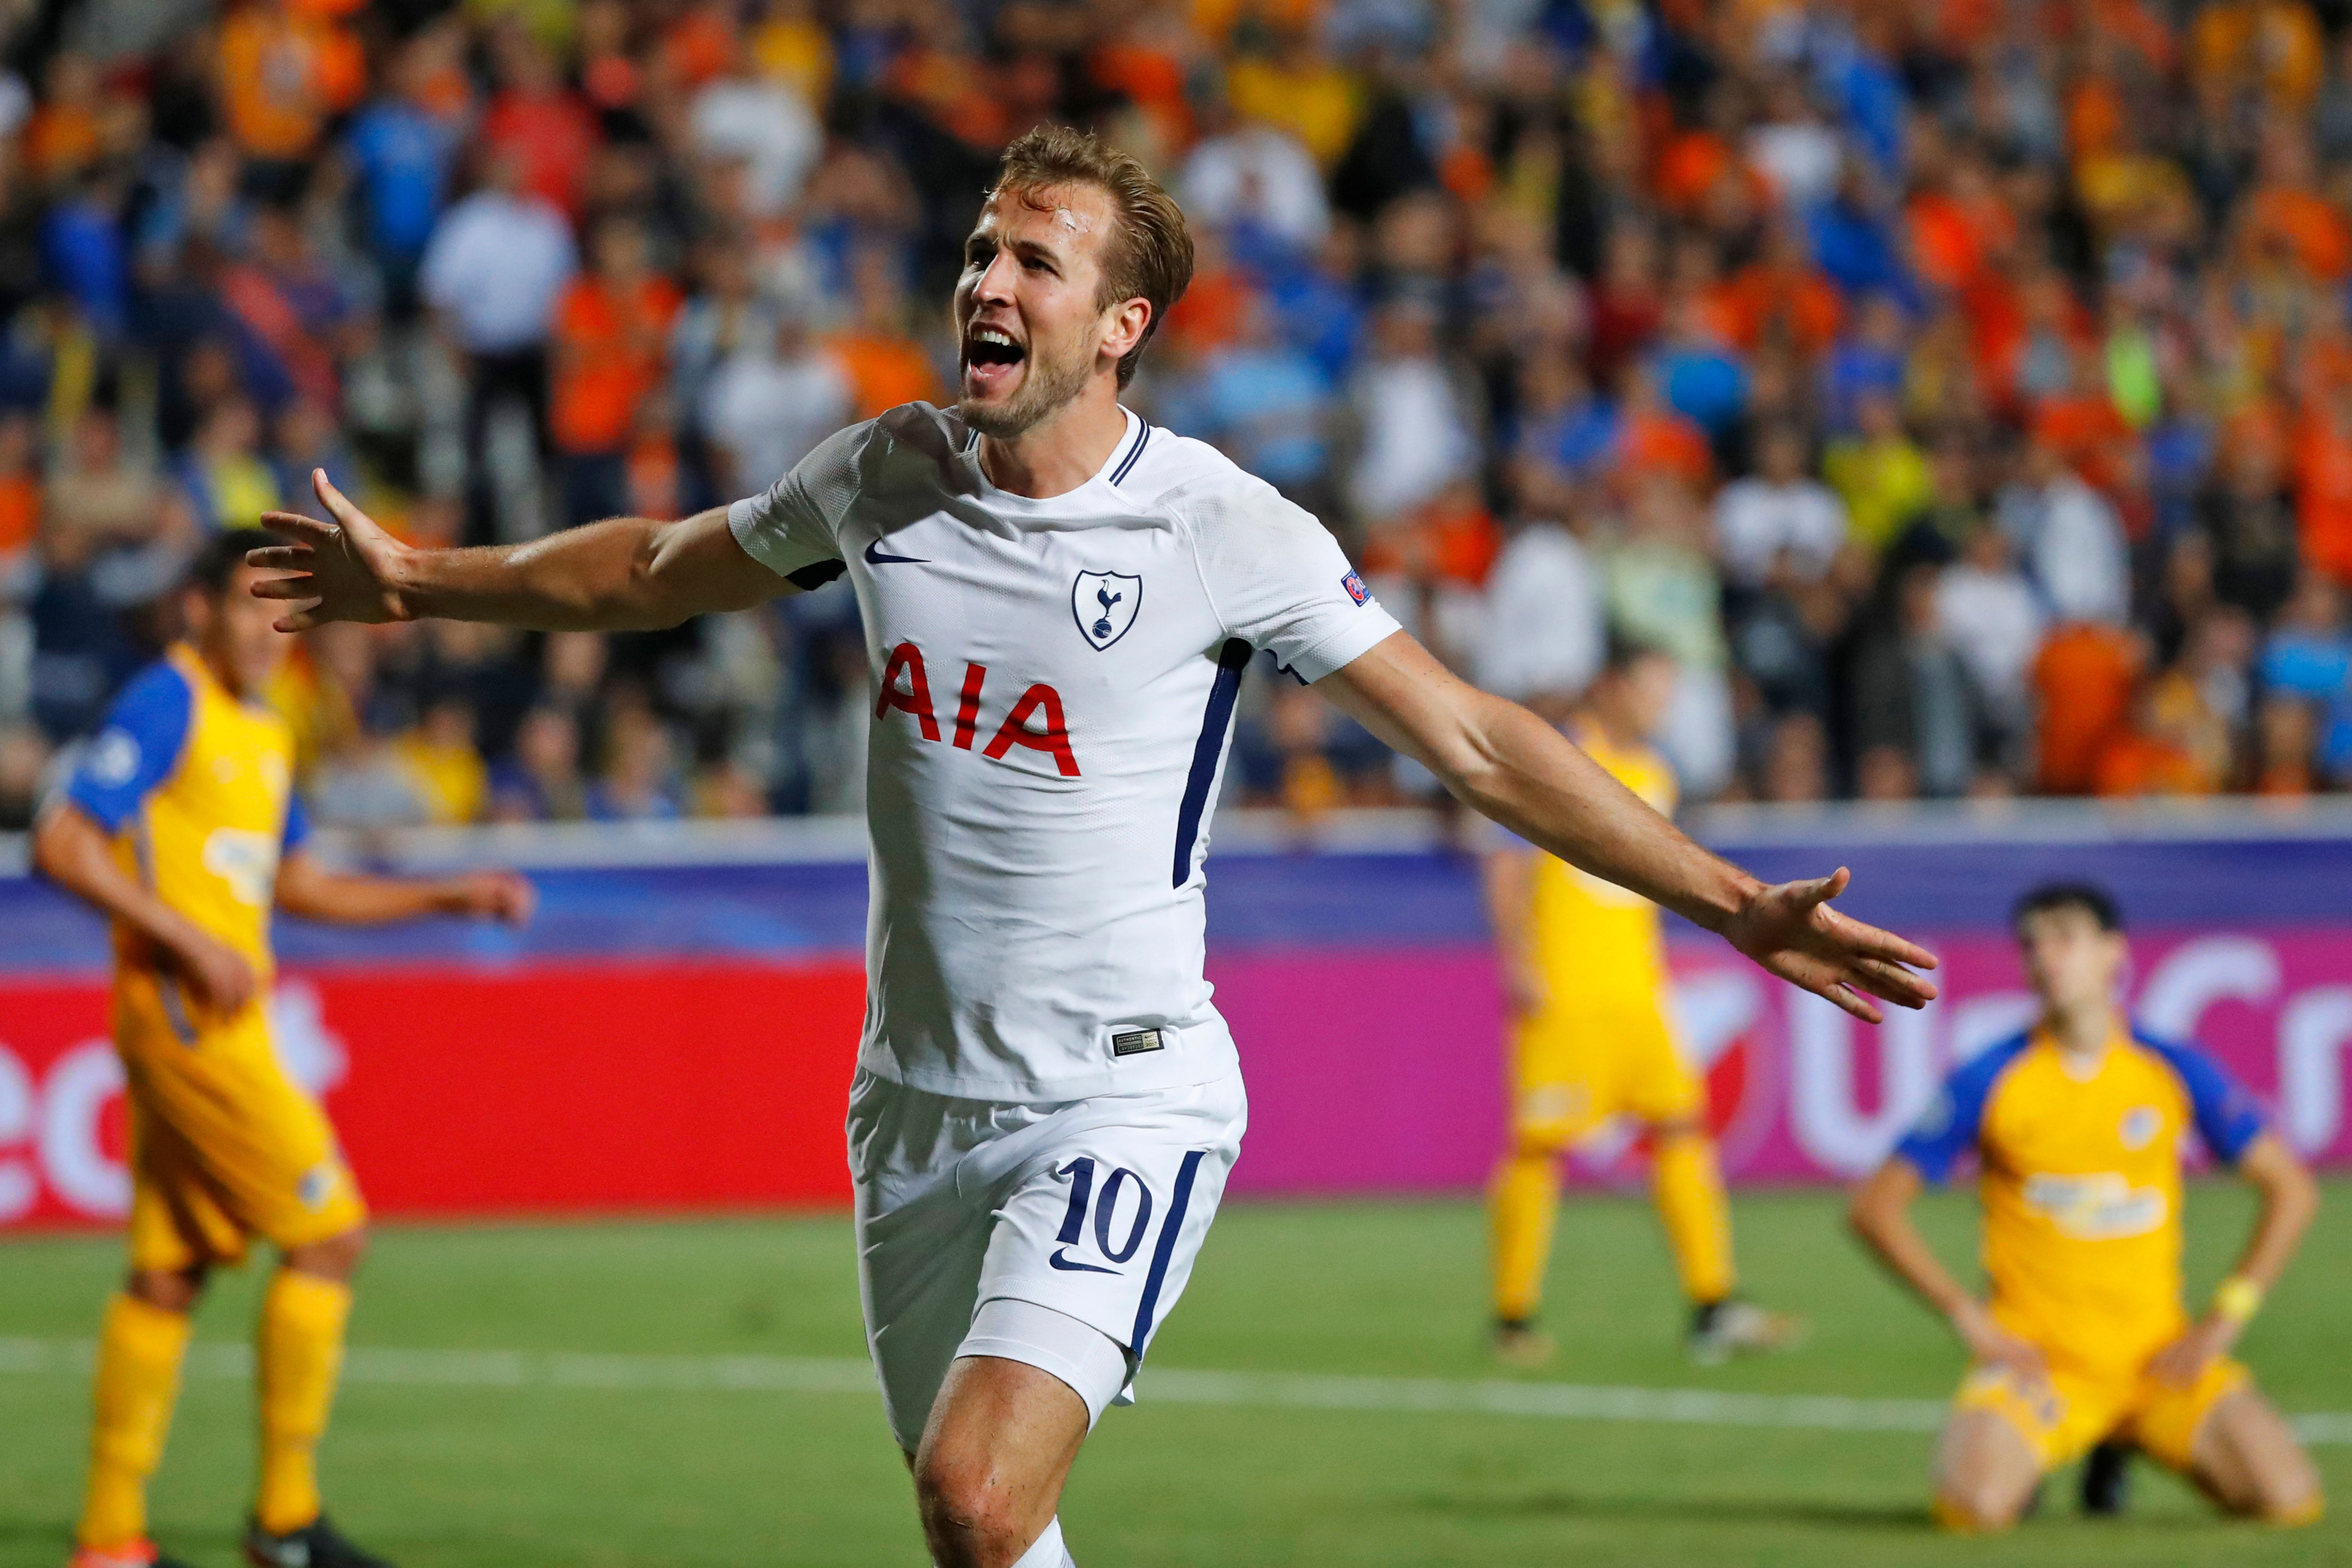 Tottenham Hotspur's English striker Harry Kane celebrates after scoring during the UEFA Champions League football match between Apoel FC and Tottenham Hotspur at the GSP Stadium in the Cypriot capital, Nicosia on September 26, 2017.  / AFP PHOTO / JACK GUEZ        (Photo credit should read JACK GUEZ/AFP/Getty Images)